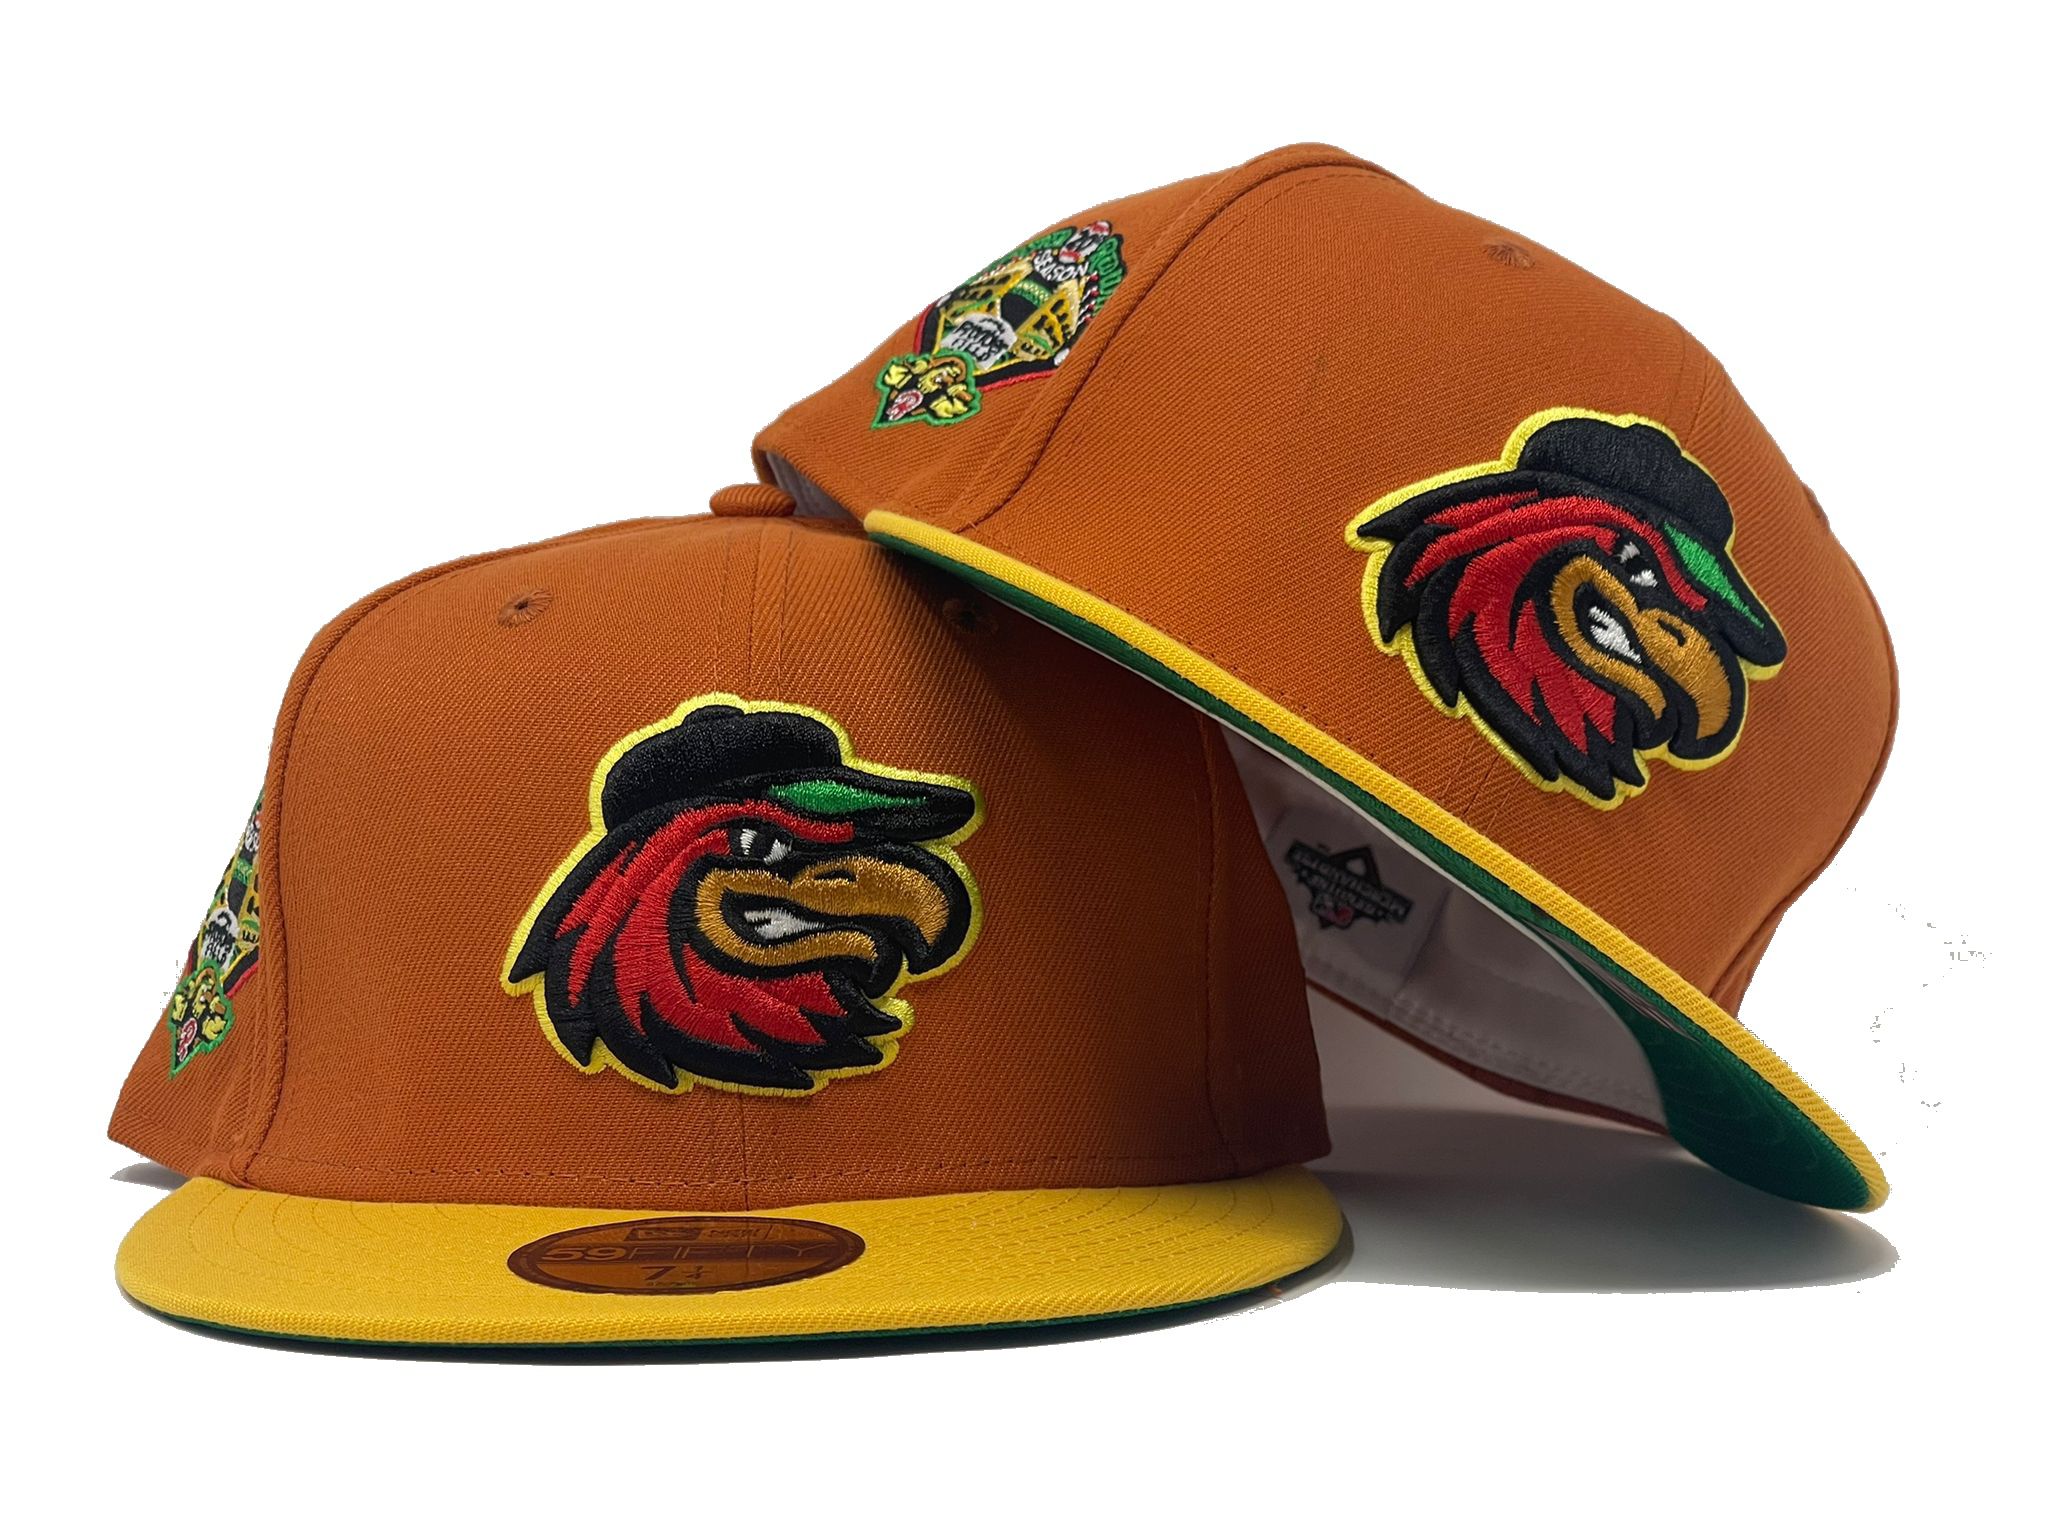 ROCHESTER RED WINGS NEW ERA FITTED CAP – SHIPPING DEPT